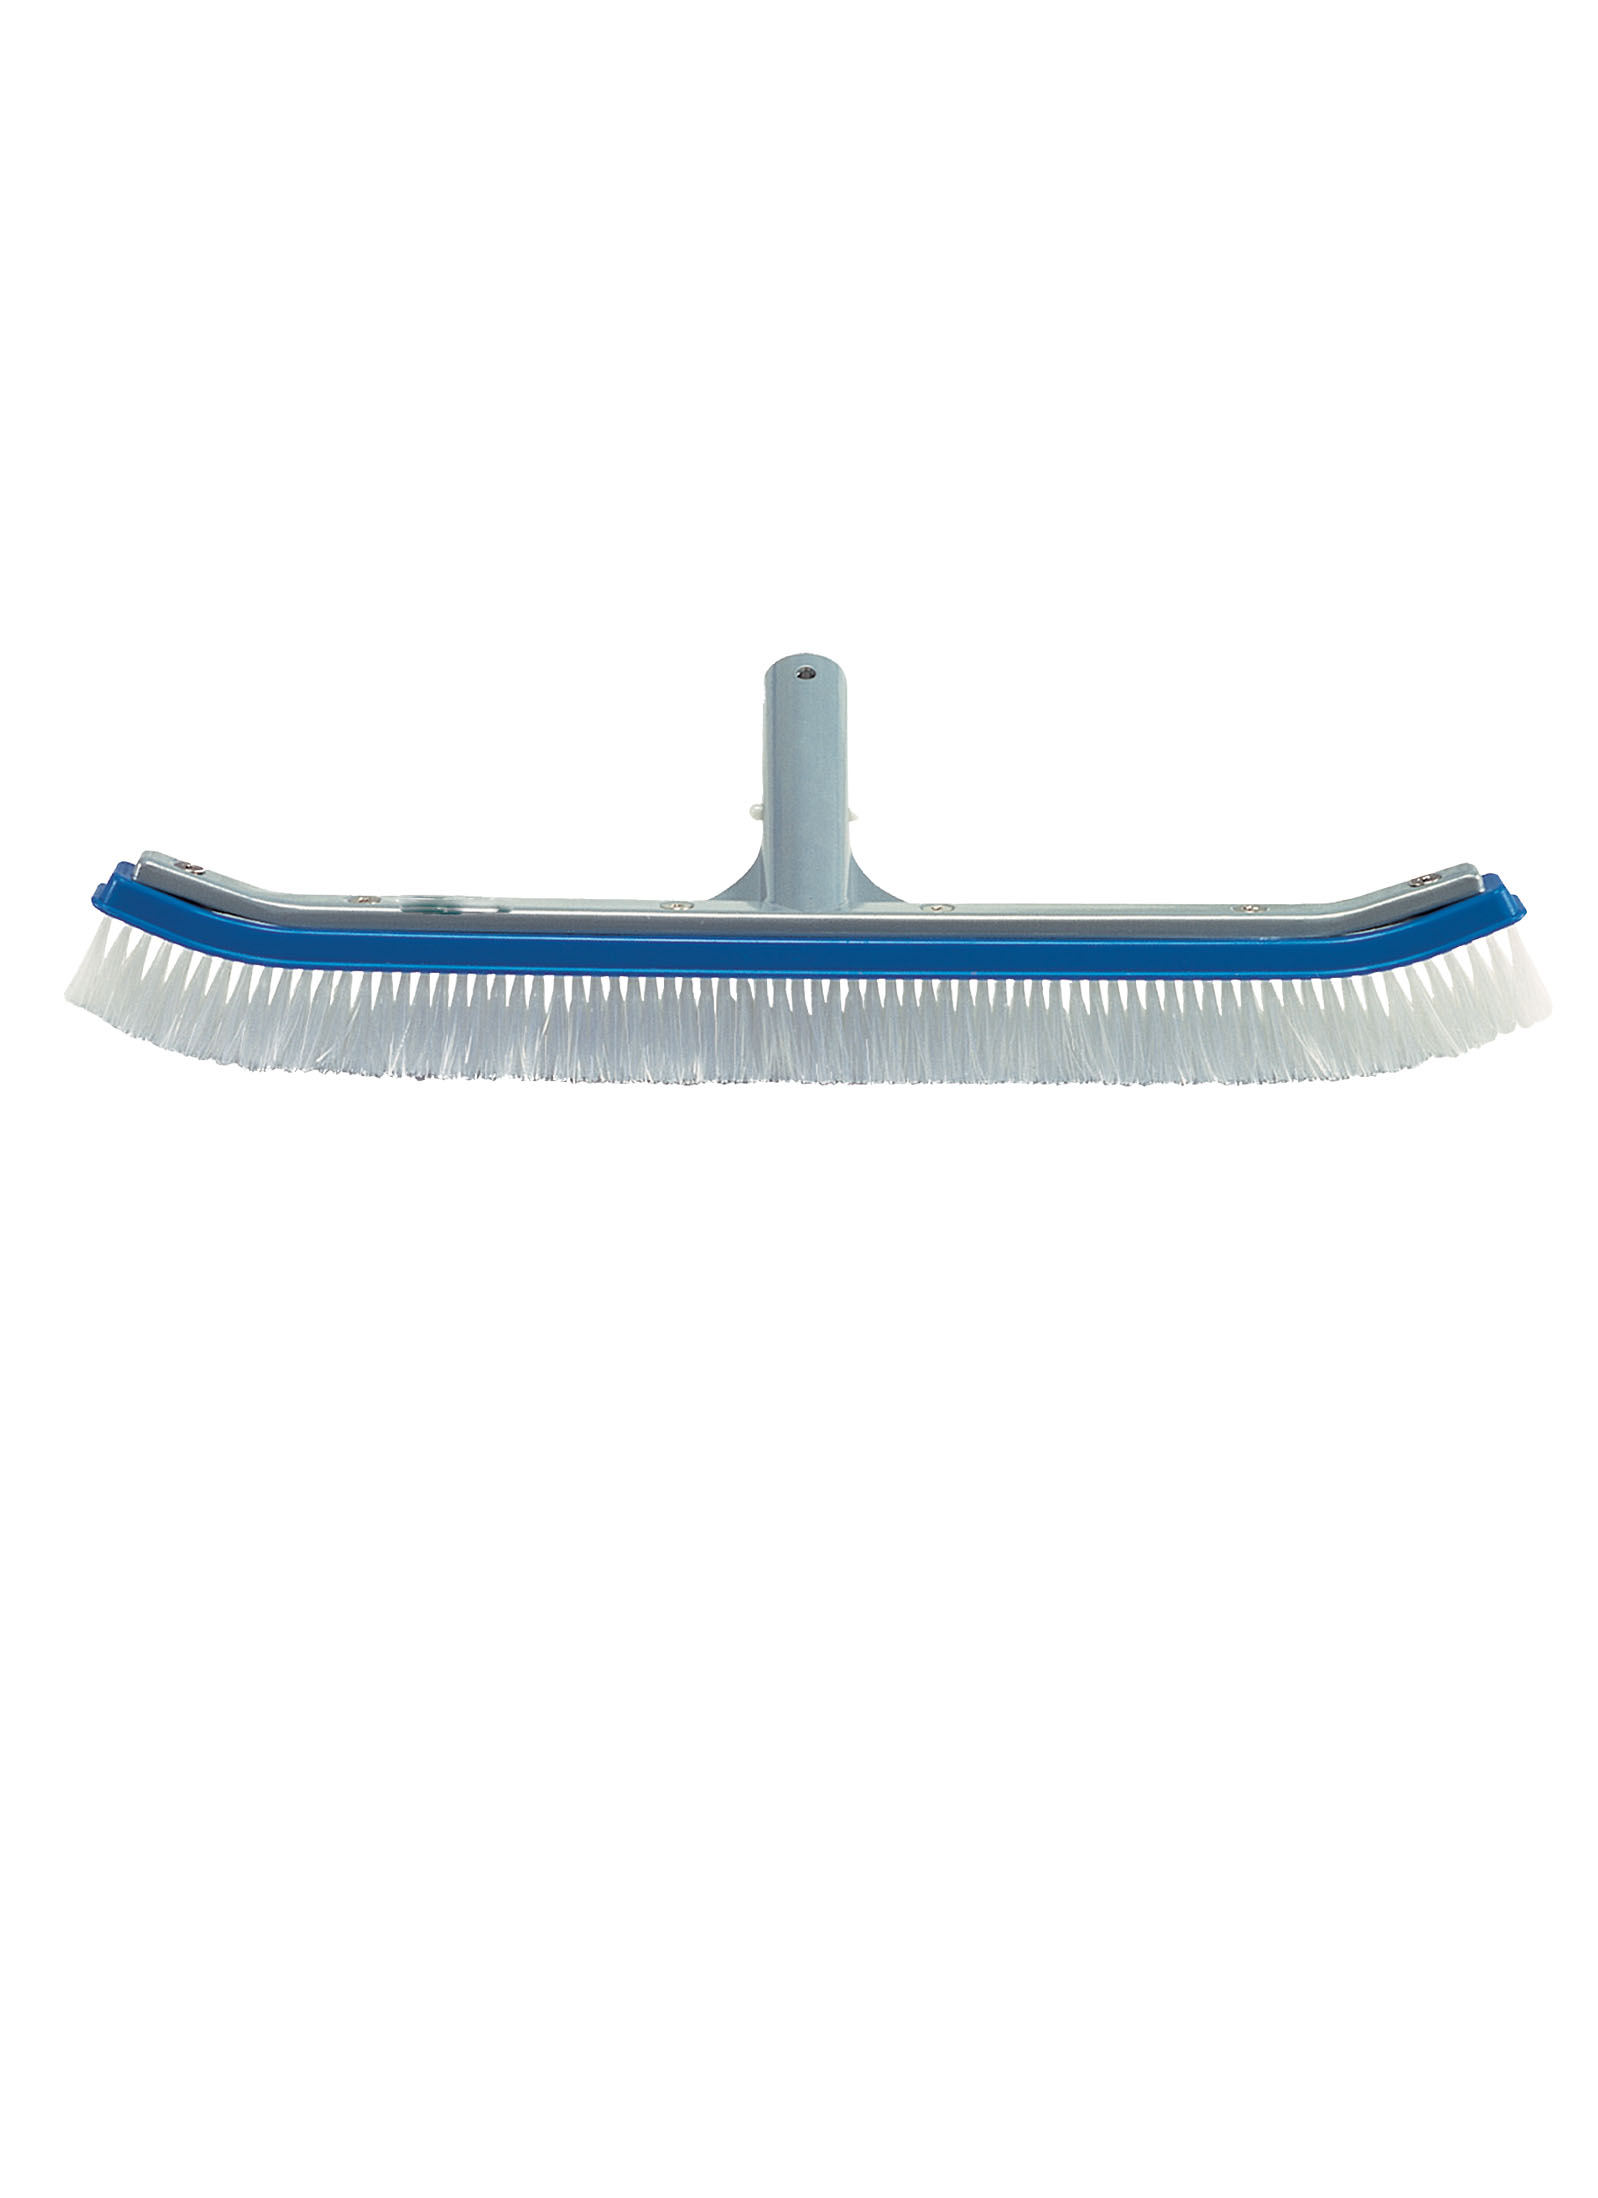 Wall Brush 18 In - Deluxe W/Alum Back - LINERS